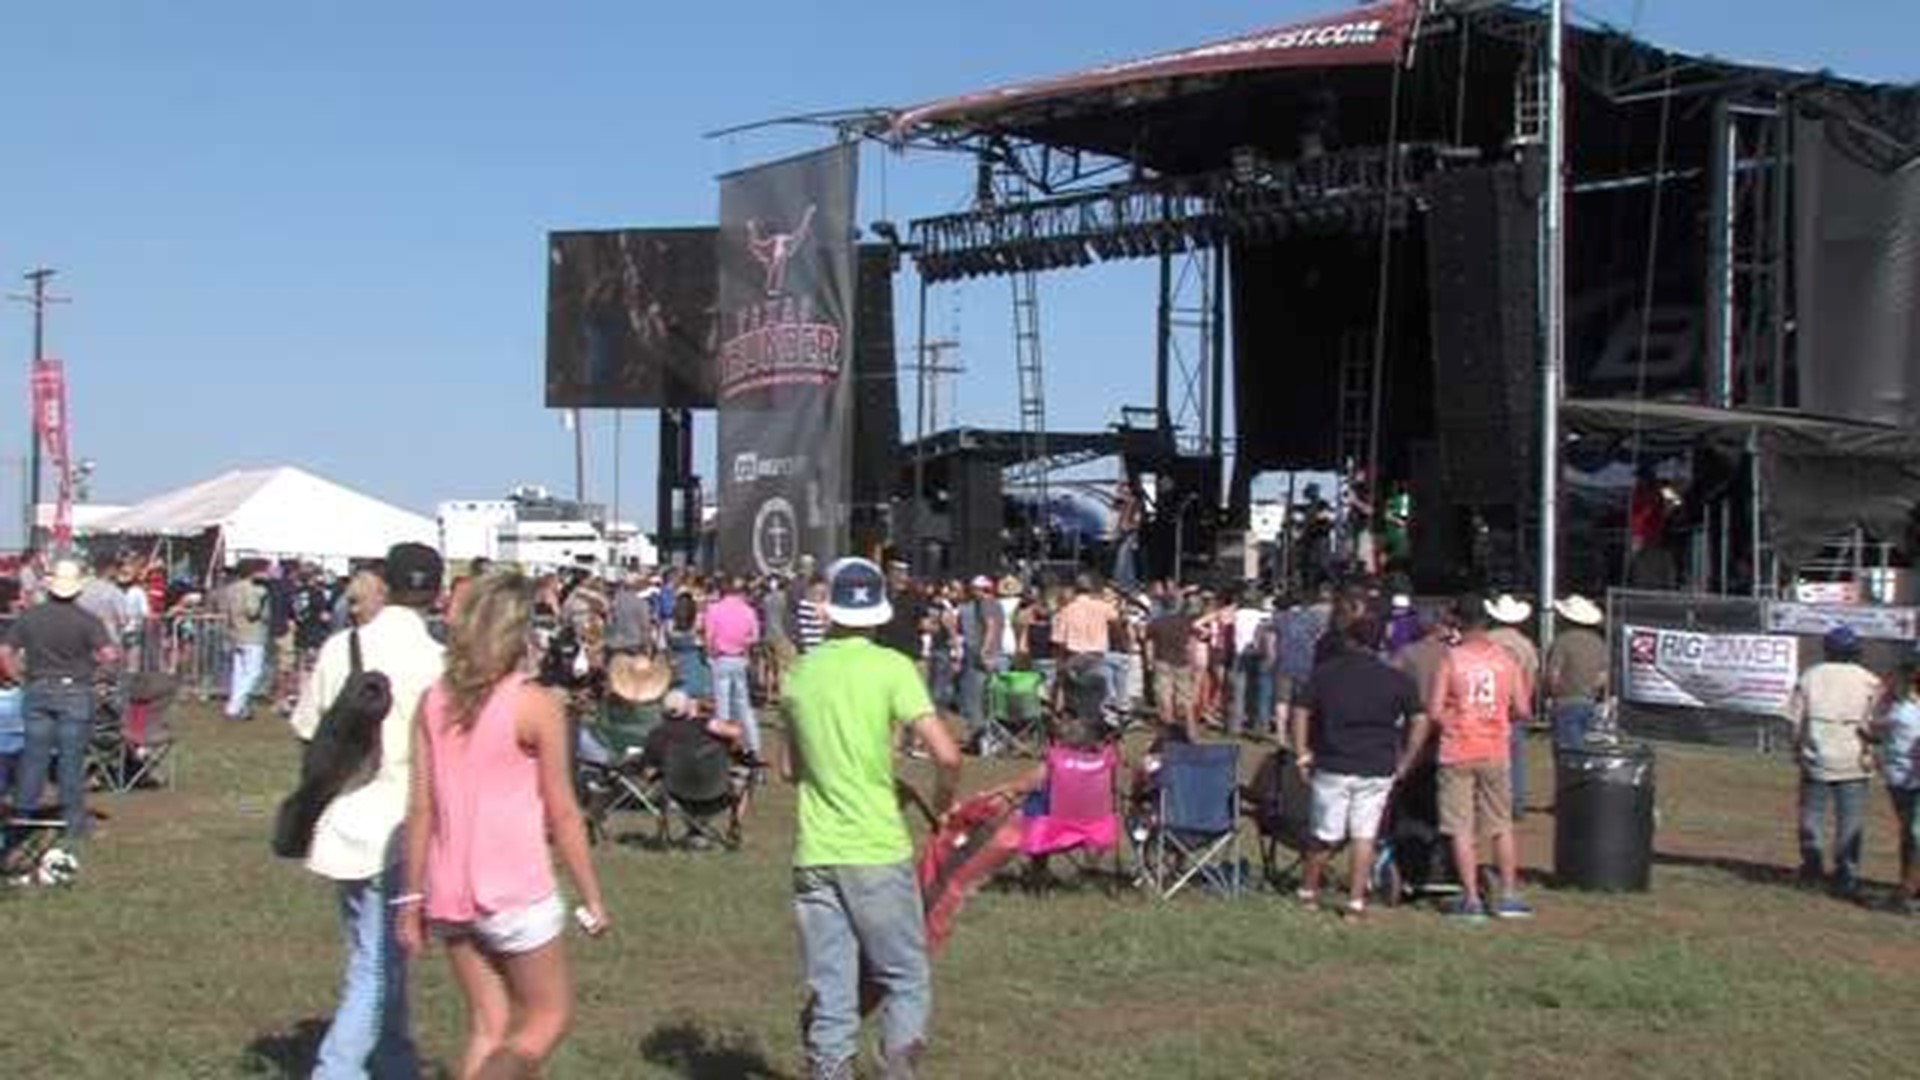 This event will highlight the Permian Basin's first major 3-day music festival coming in 2022.